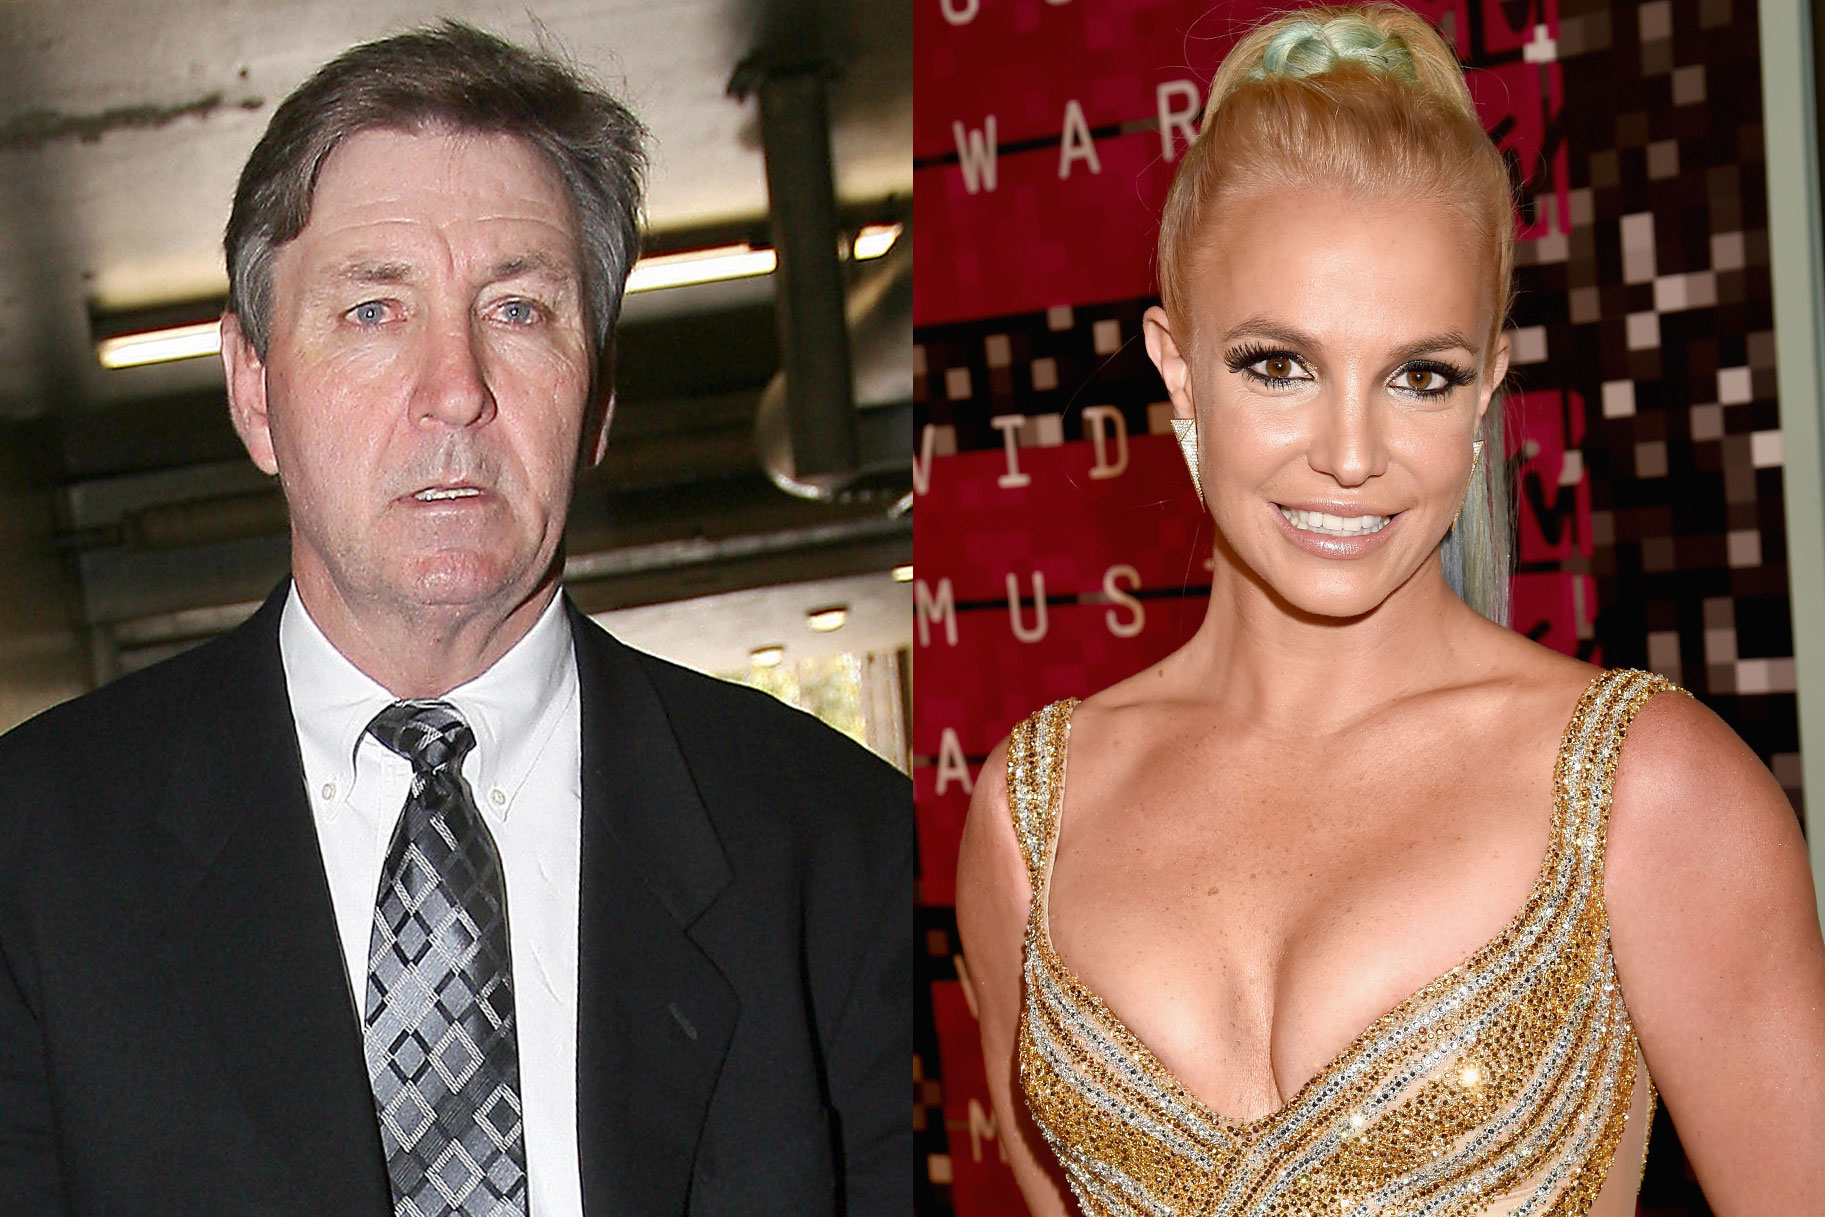 Britney Spears’ Lawyer Claims To Be The “King Of Entertainment Litigation” In Heated Exchange With Jamie’s Lawyer